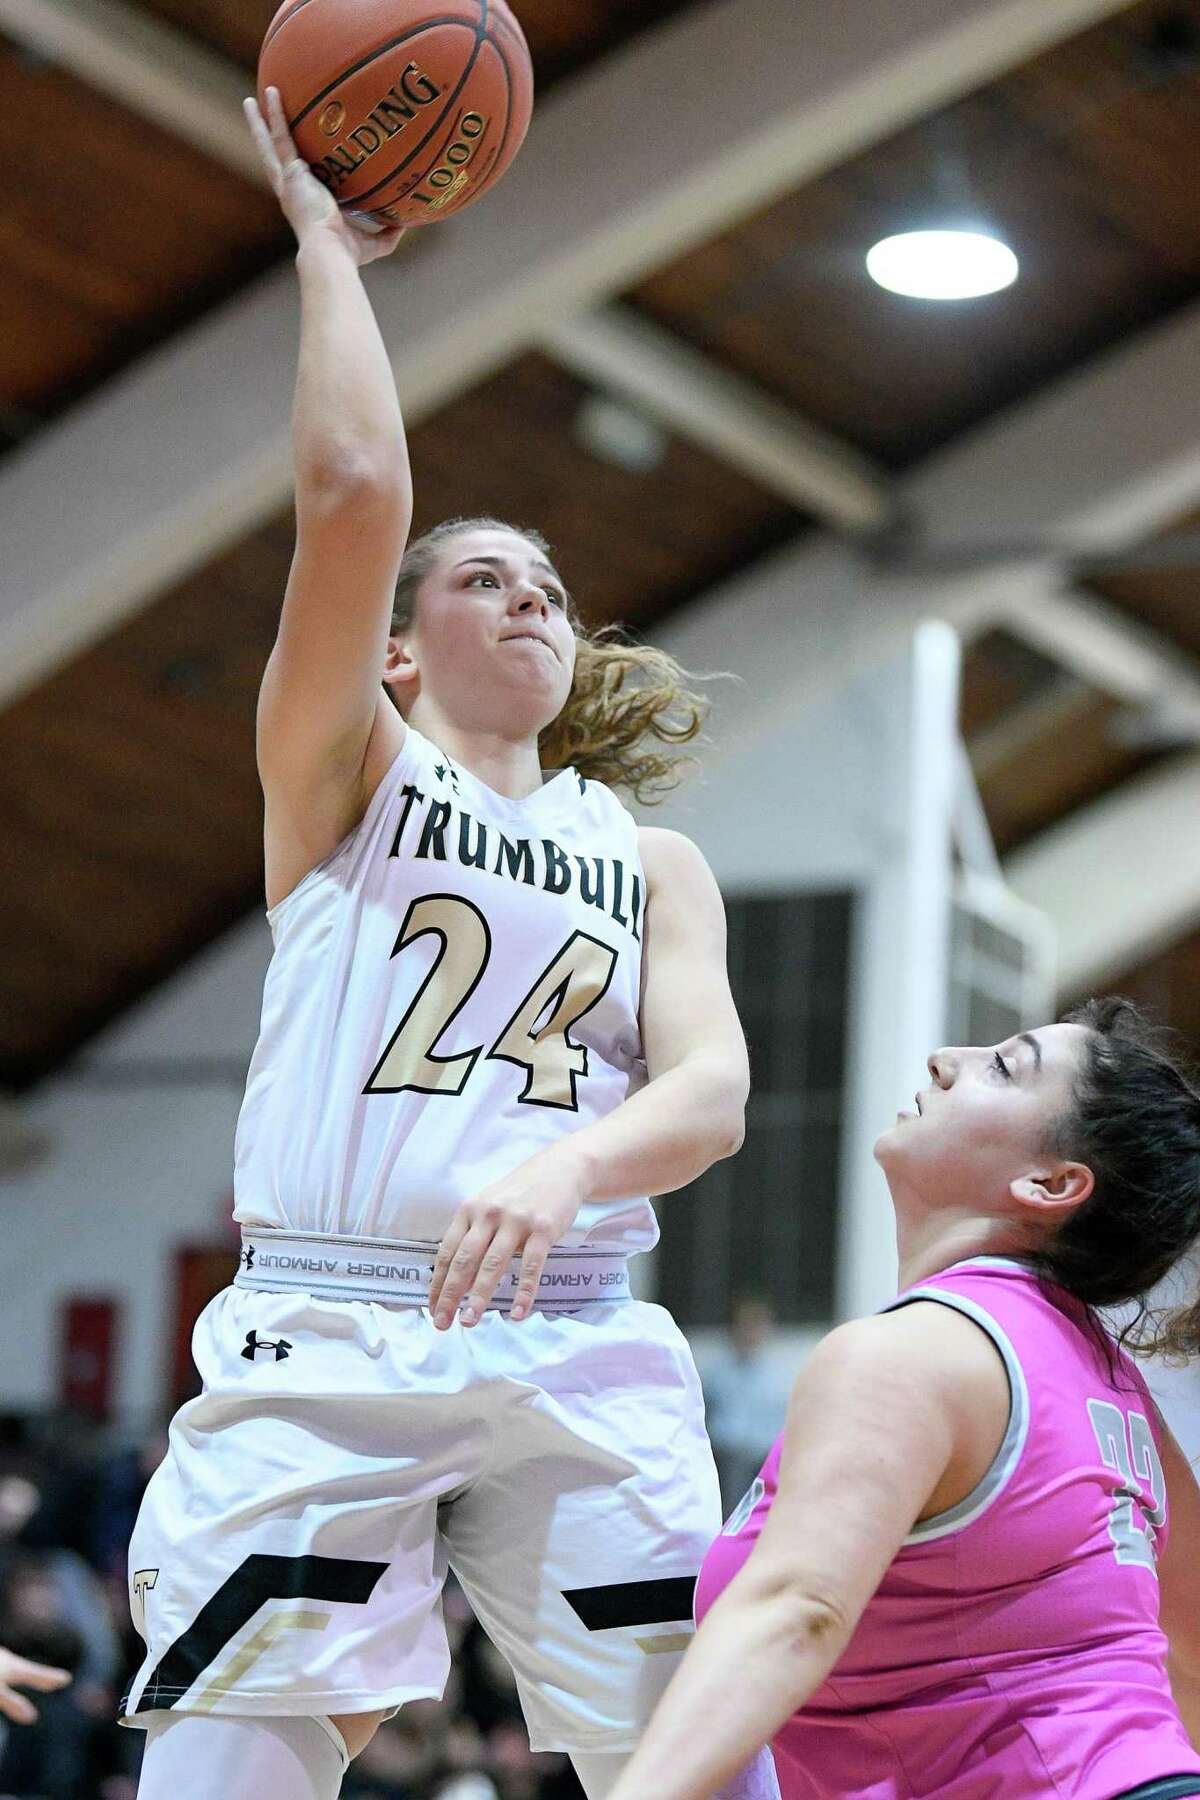 Trumbull High’s Cassi Barbato drives against St. Joseph in the first game of the Playing for a Cure doubleheader at Fairfield University’s Alumni Hall, Friday, Feb. 7, 2020.